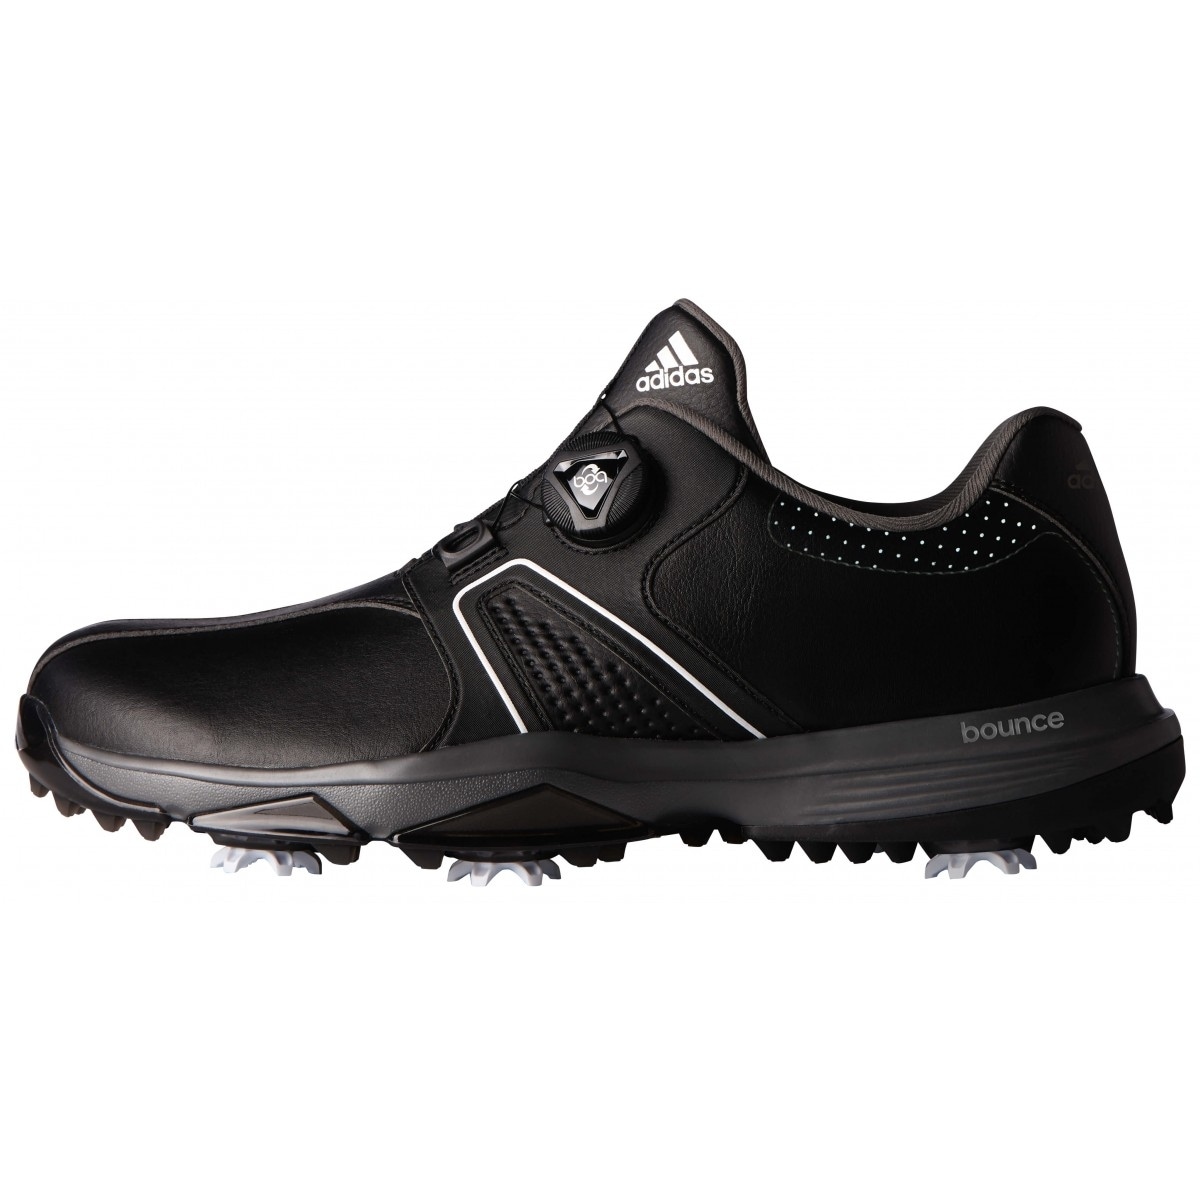 adidas 360 traxion golf shoes with boa closure